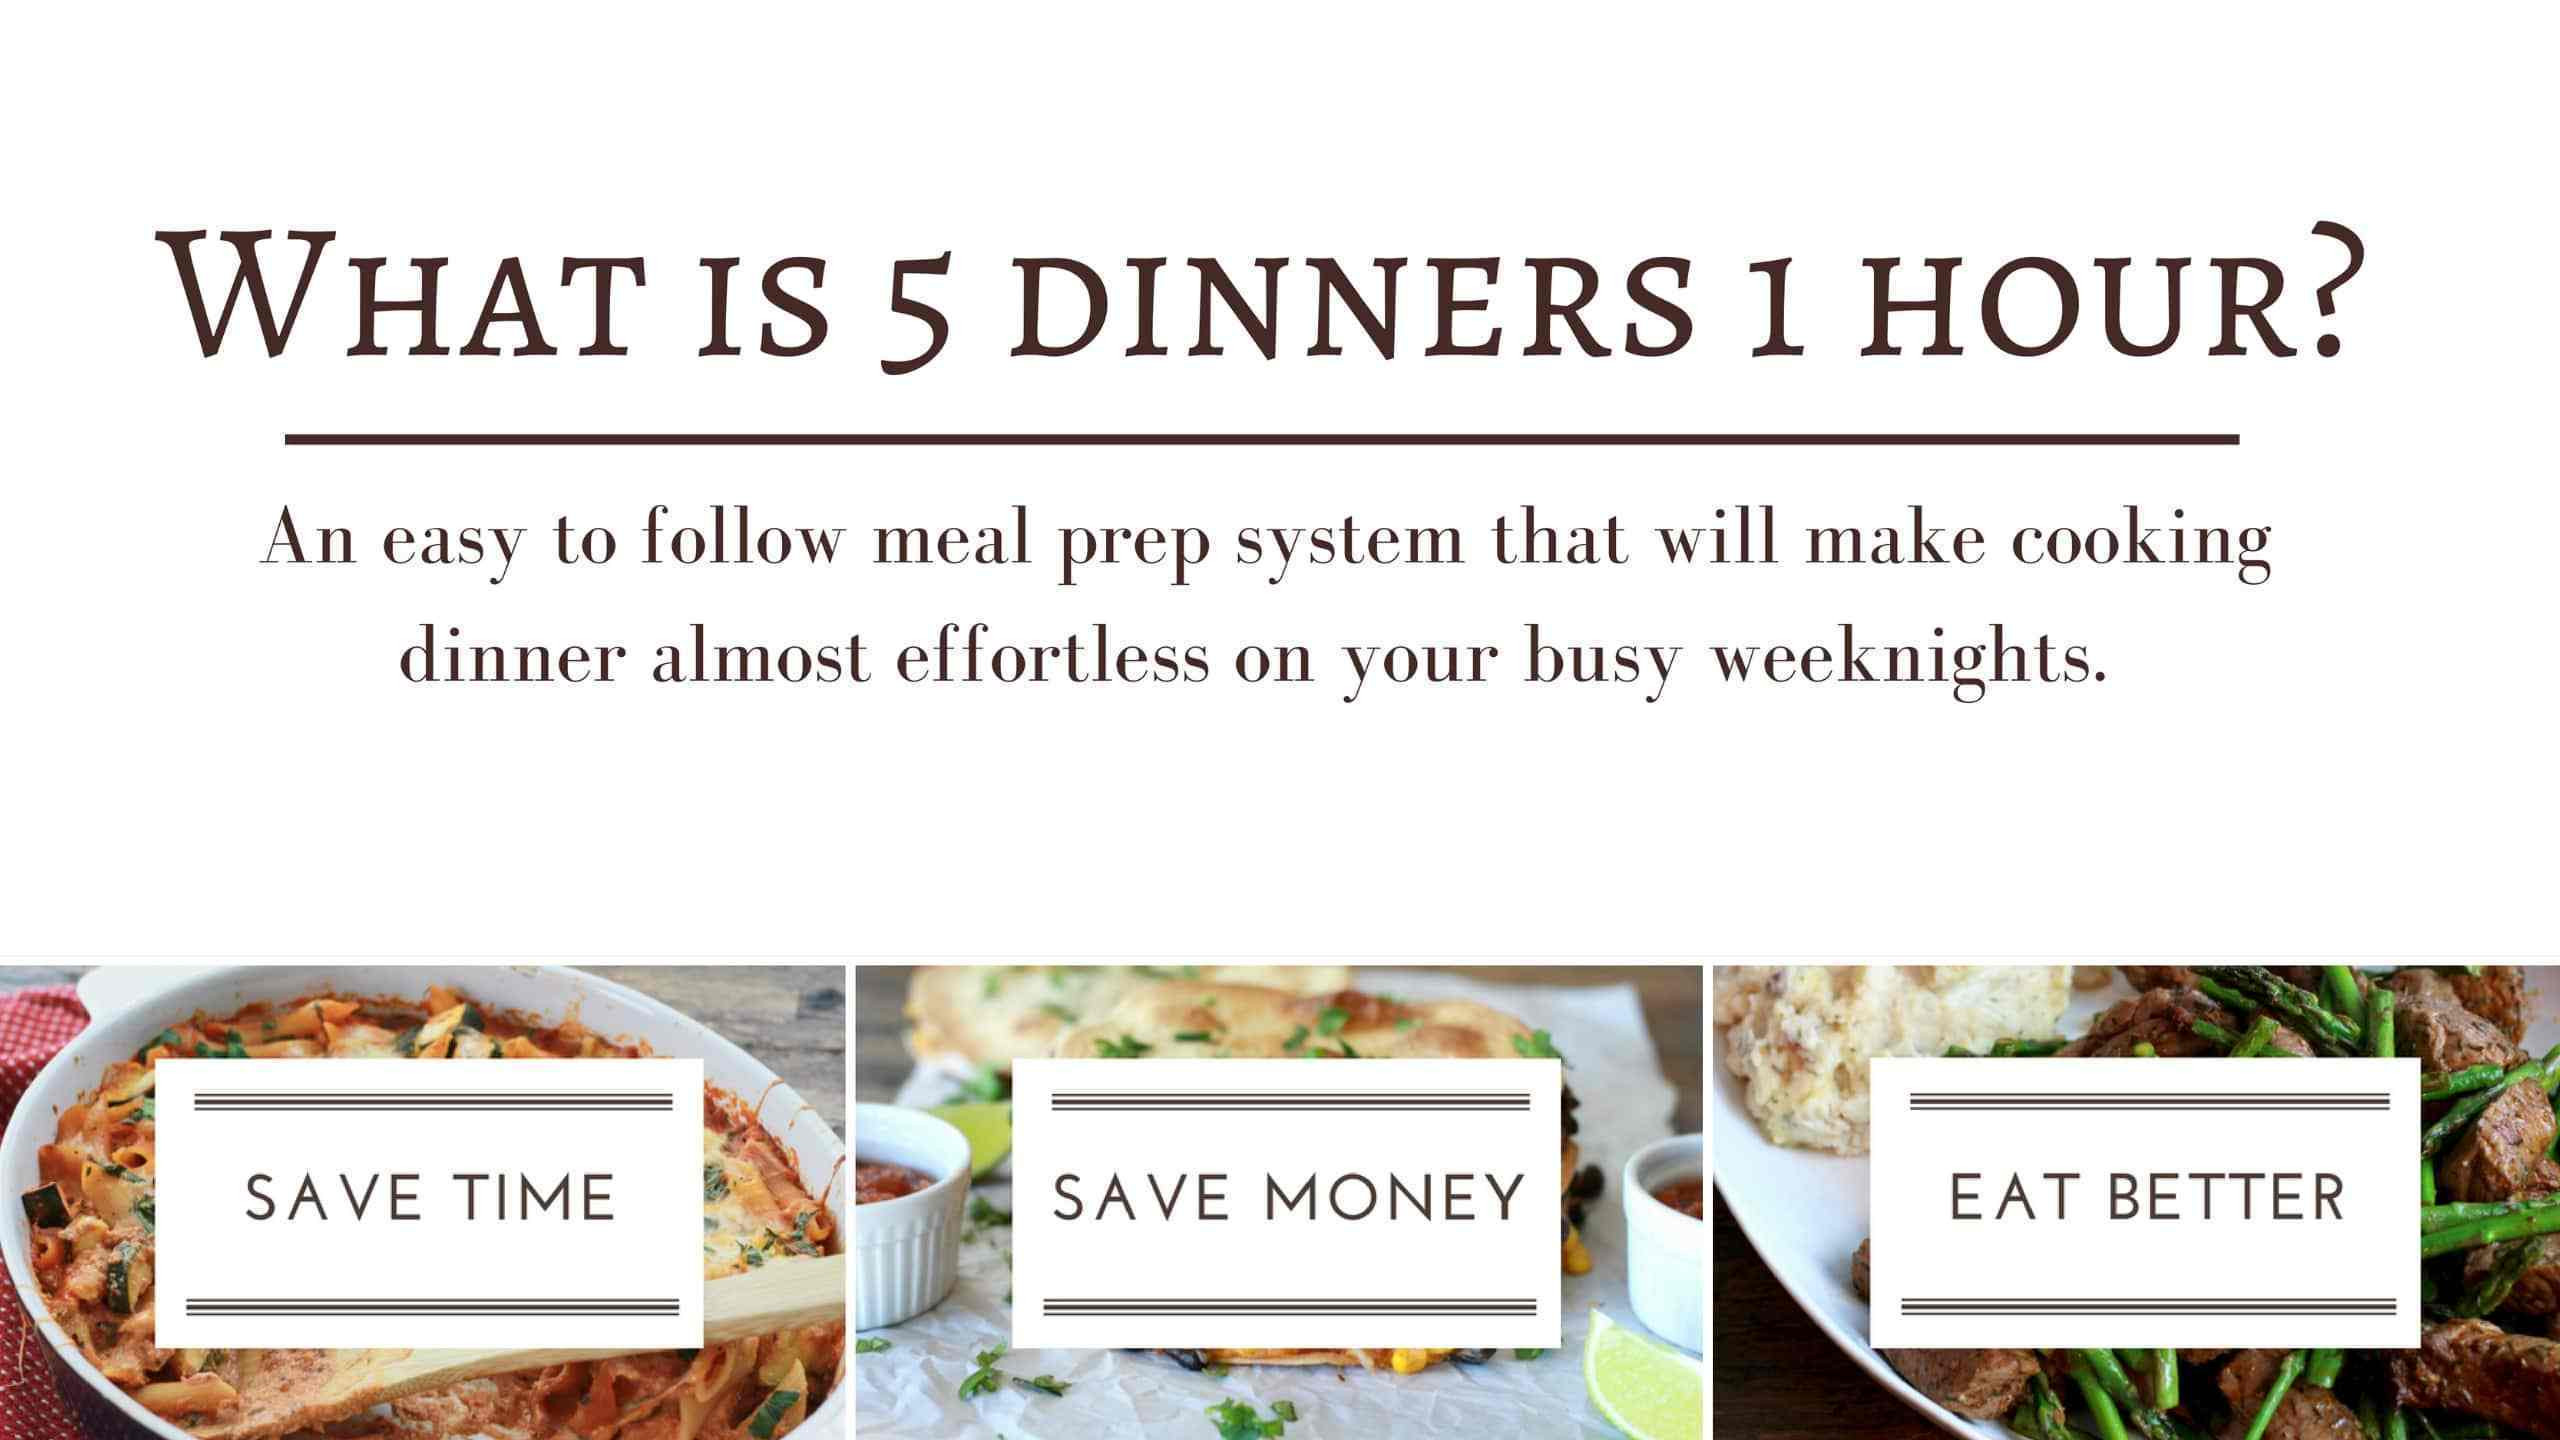 5 Dinners In 1 Hour
 5 Dinners In 1 Hour The meal planning system that saves